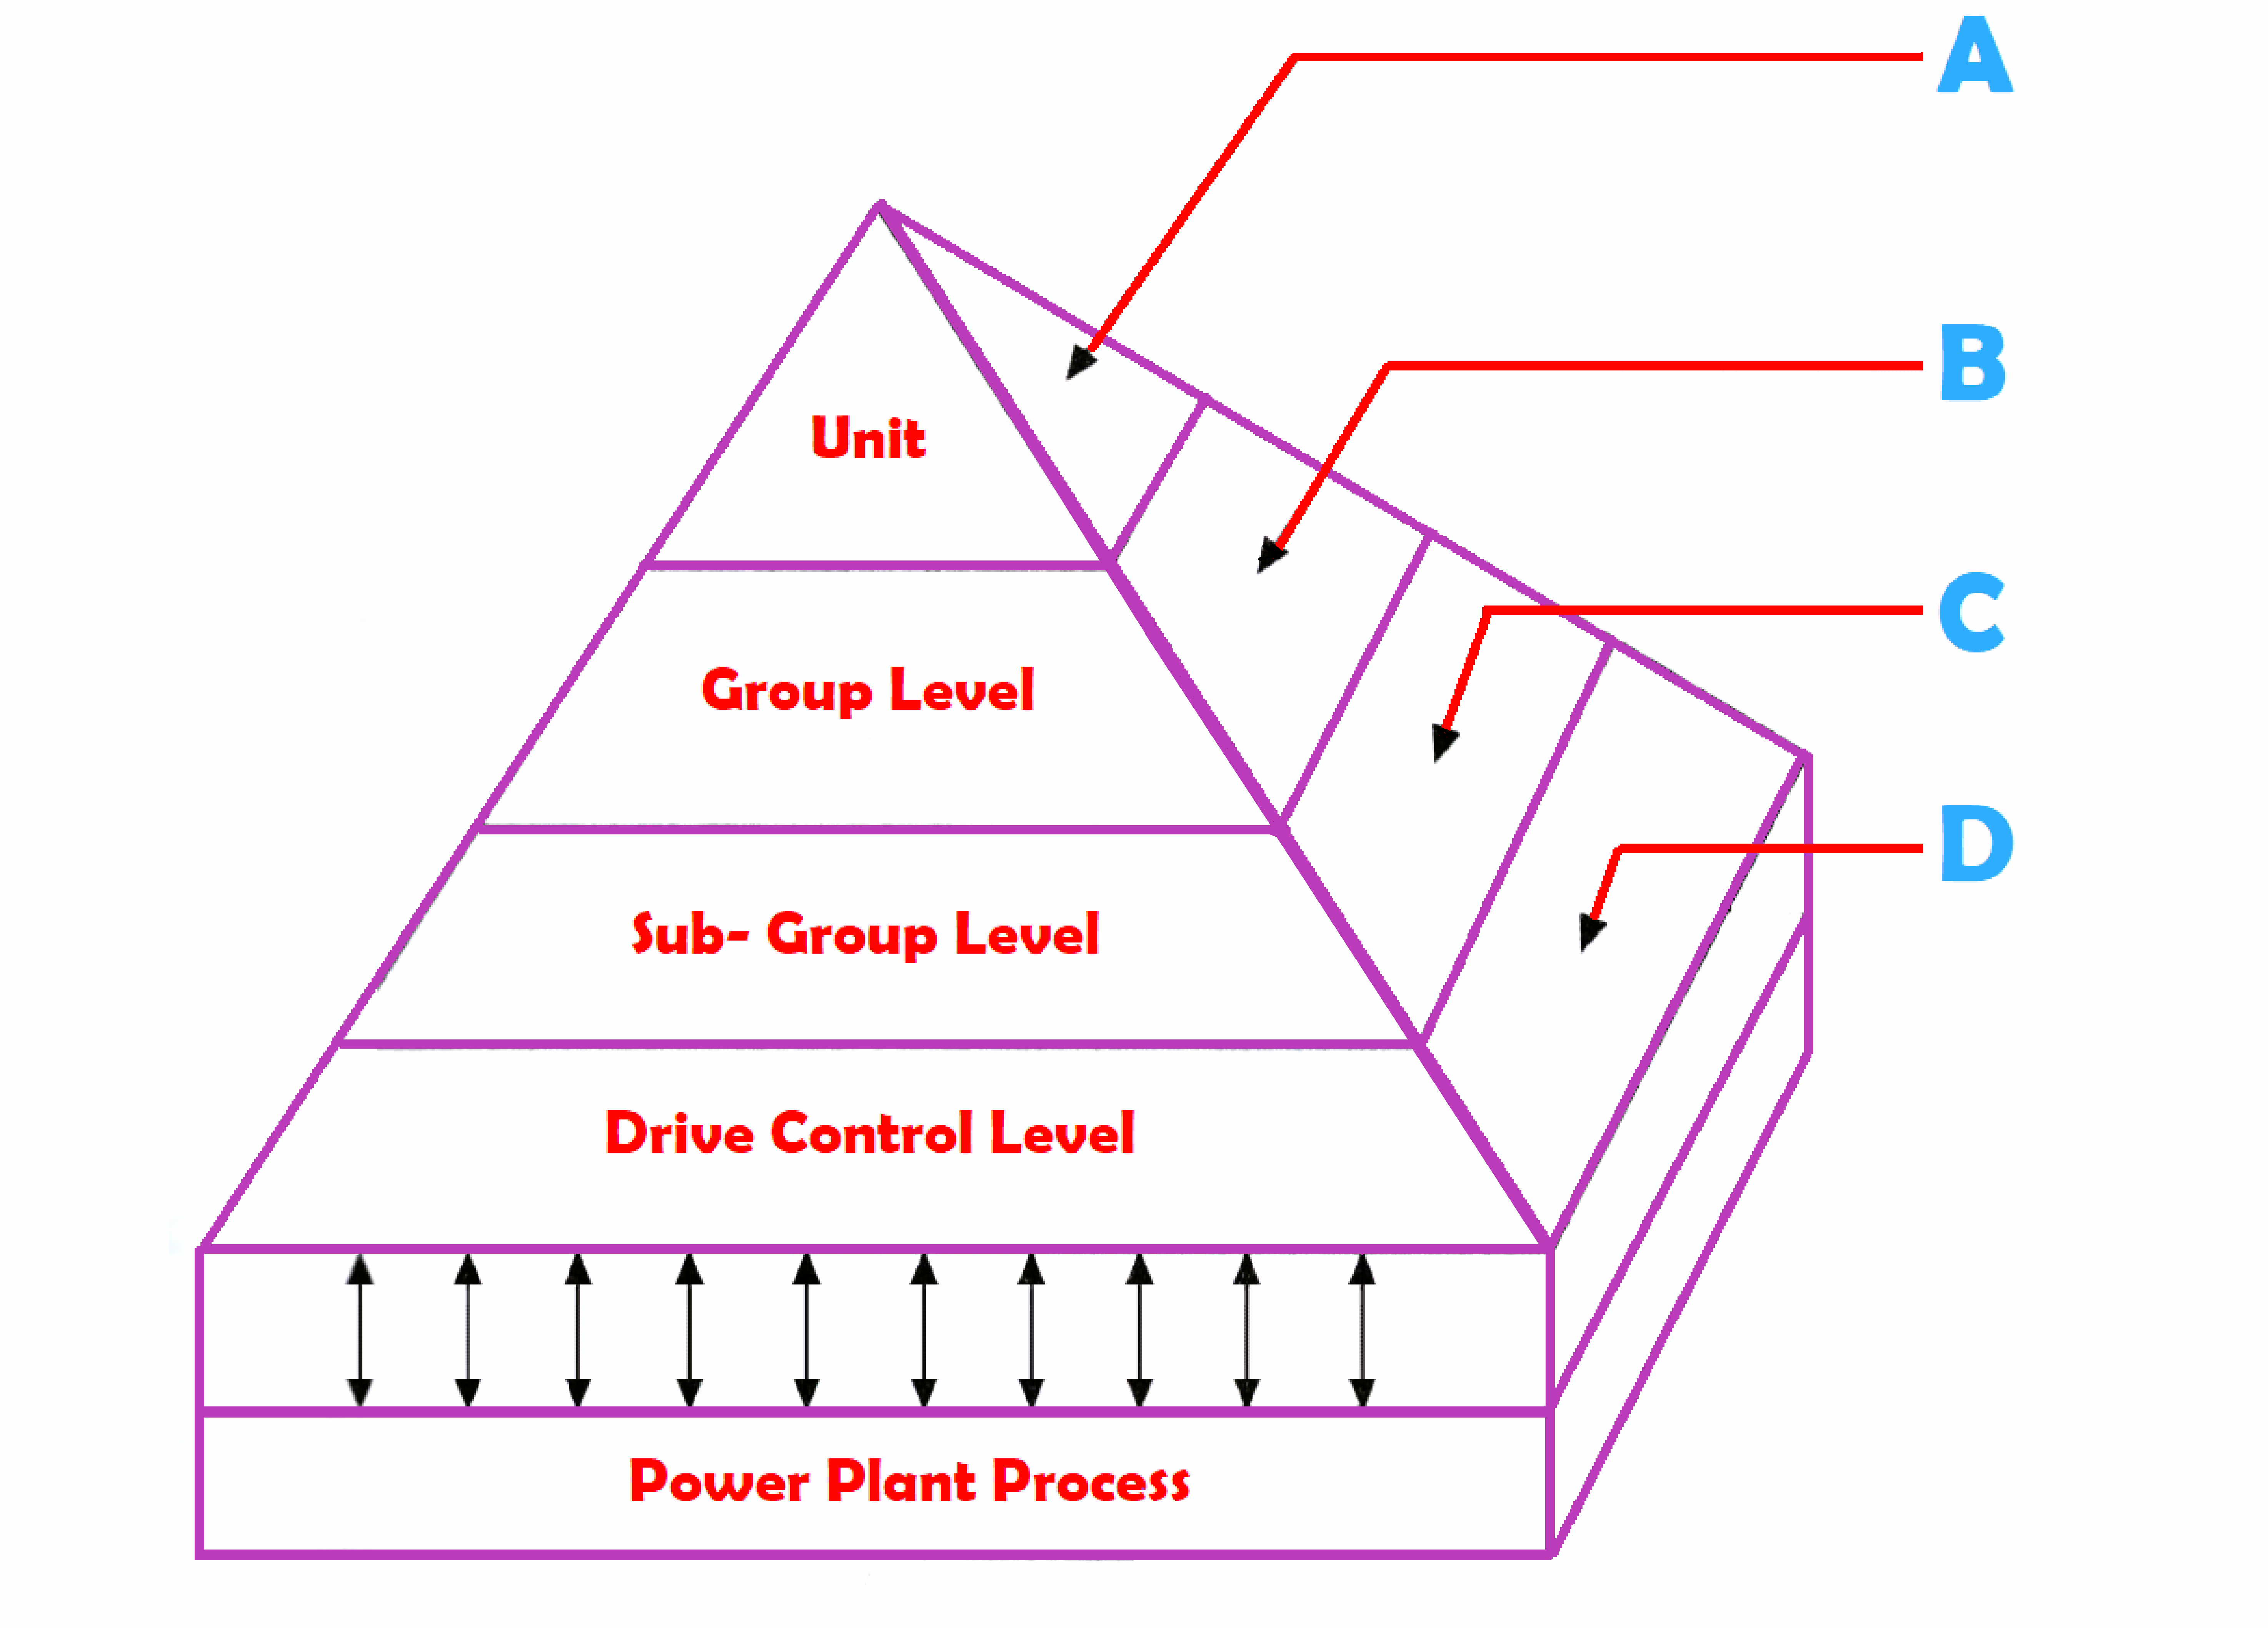 Application of DCS in Power Plant Automation